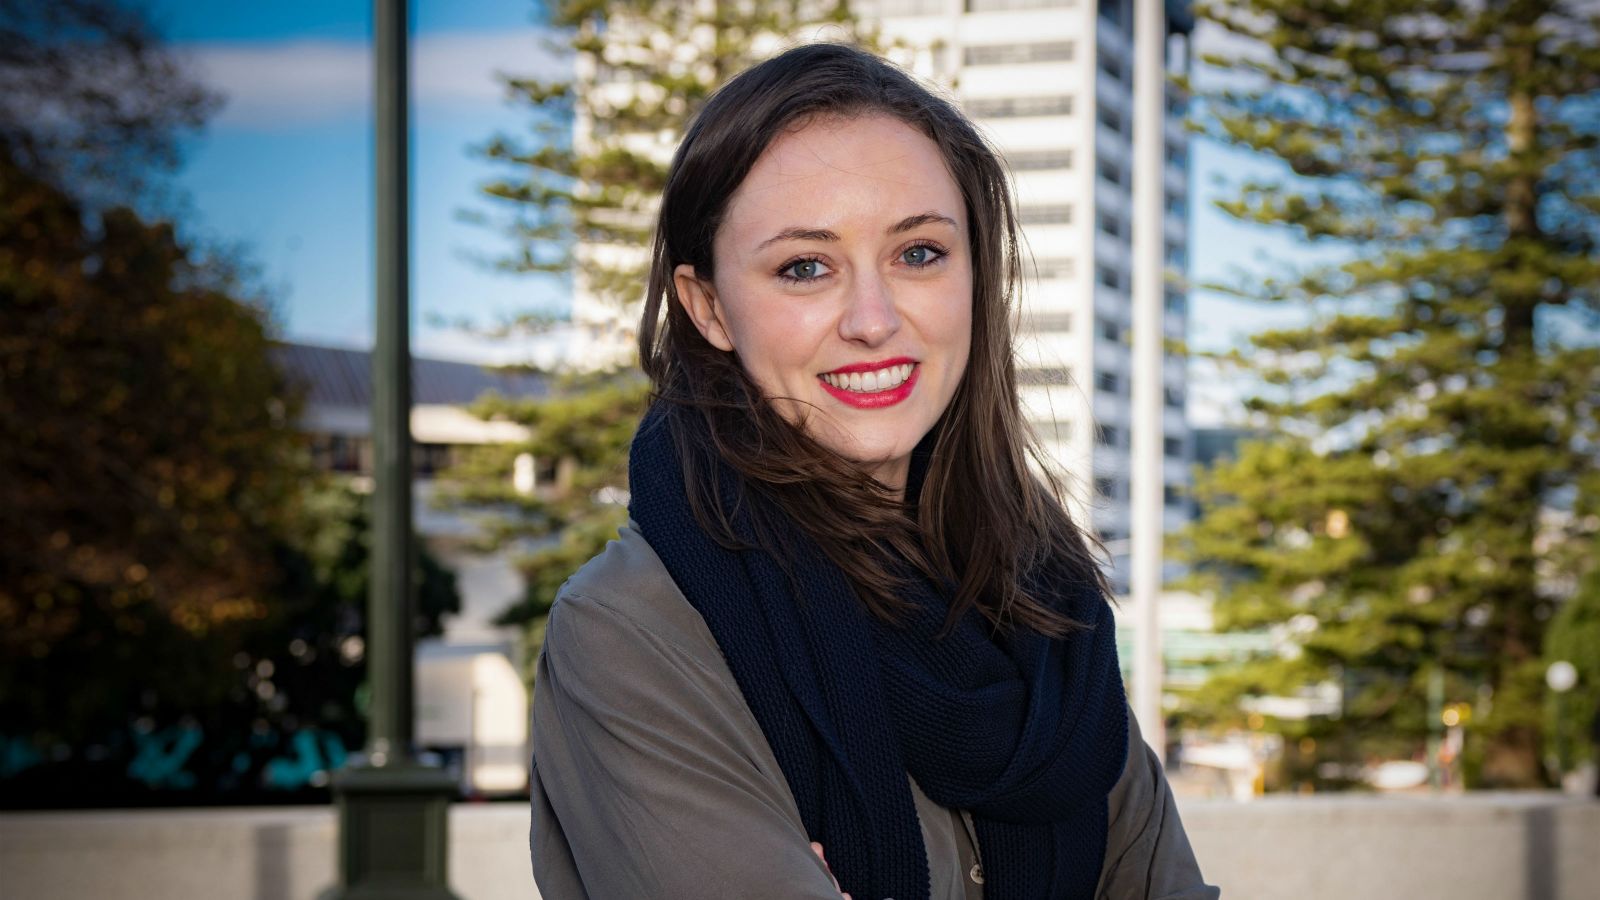 Kelle Howson, wearing a dark grey shirt and black scarf, stands with her arms crossed in Wellington city. Behind her is the blurred outline of a high rise building and trees.